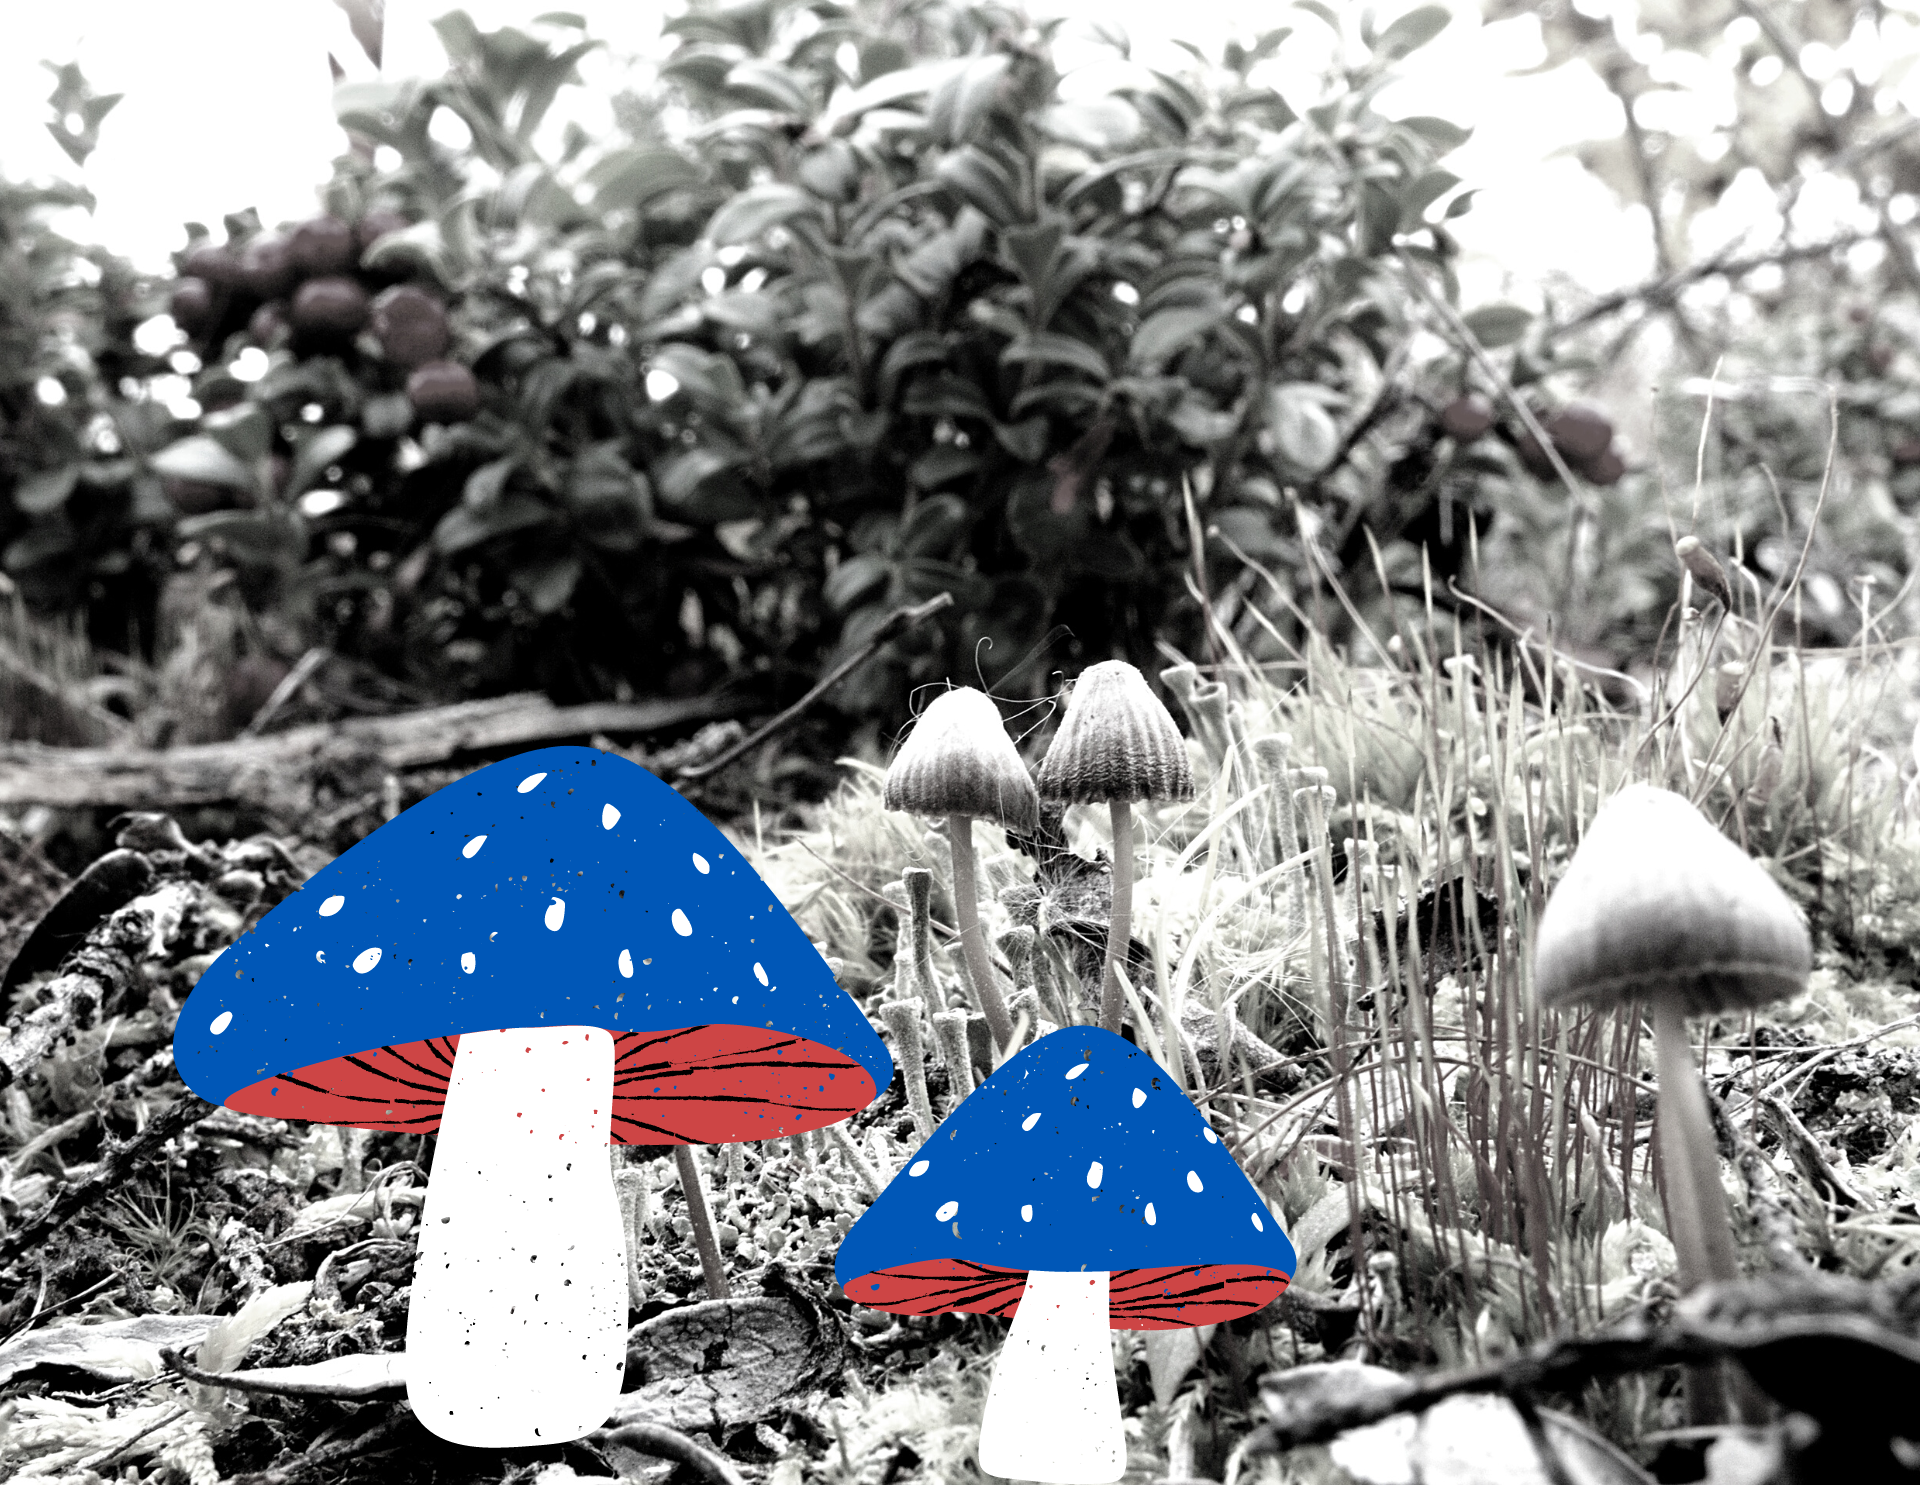 Black and white photo of mushrooms in a forest. Two of the mushrooms stand out in blue and red.